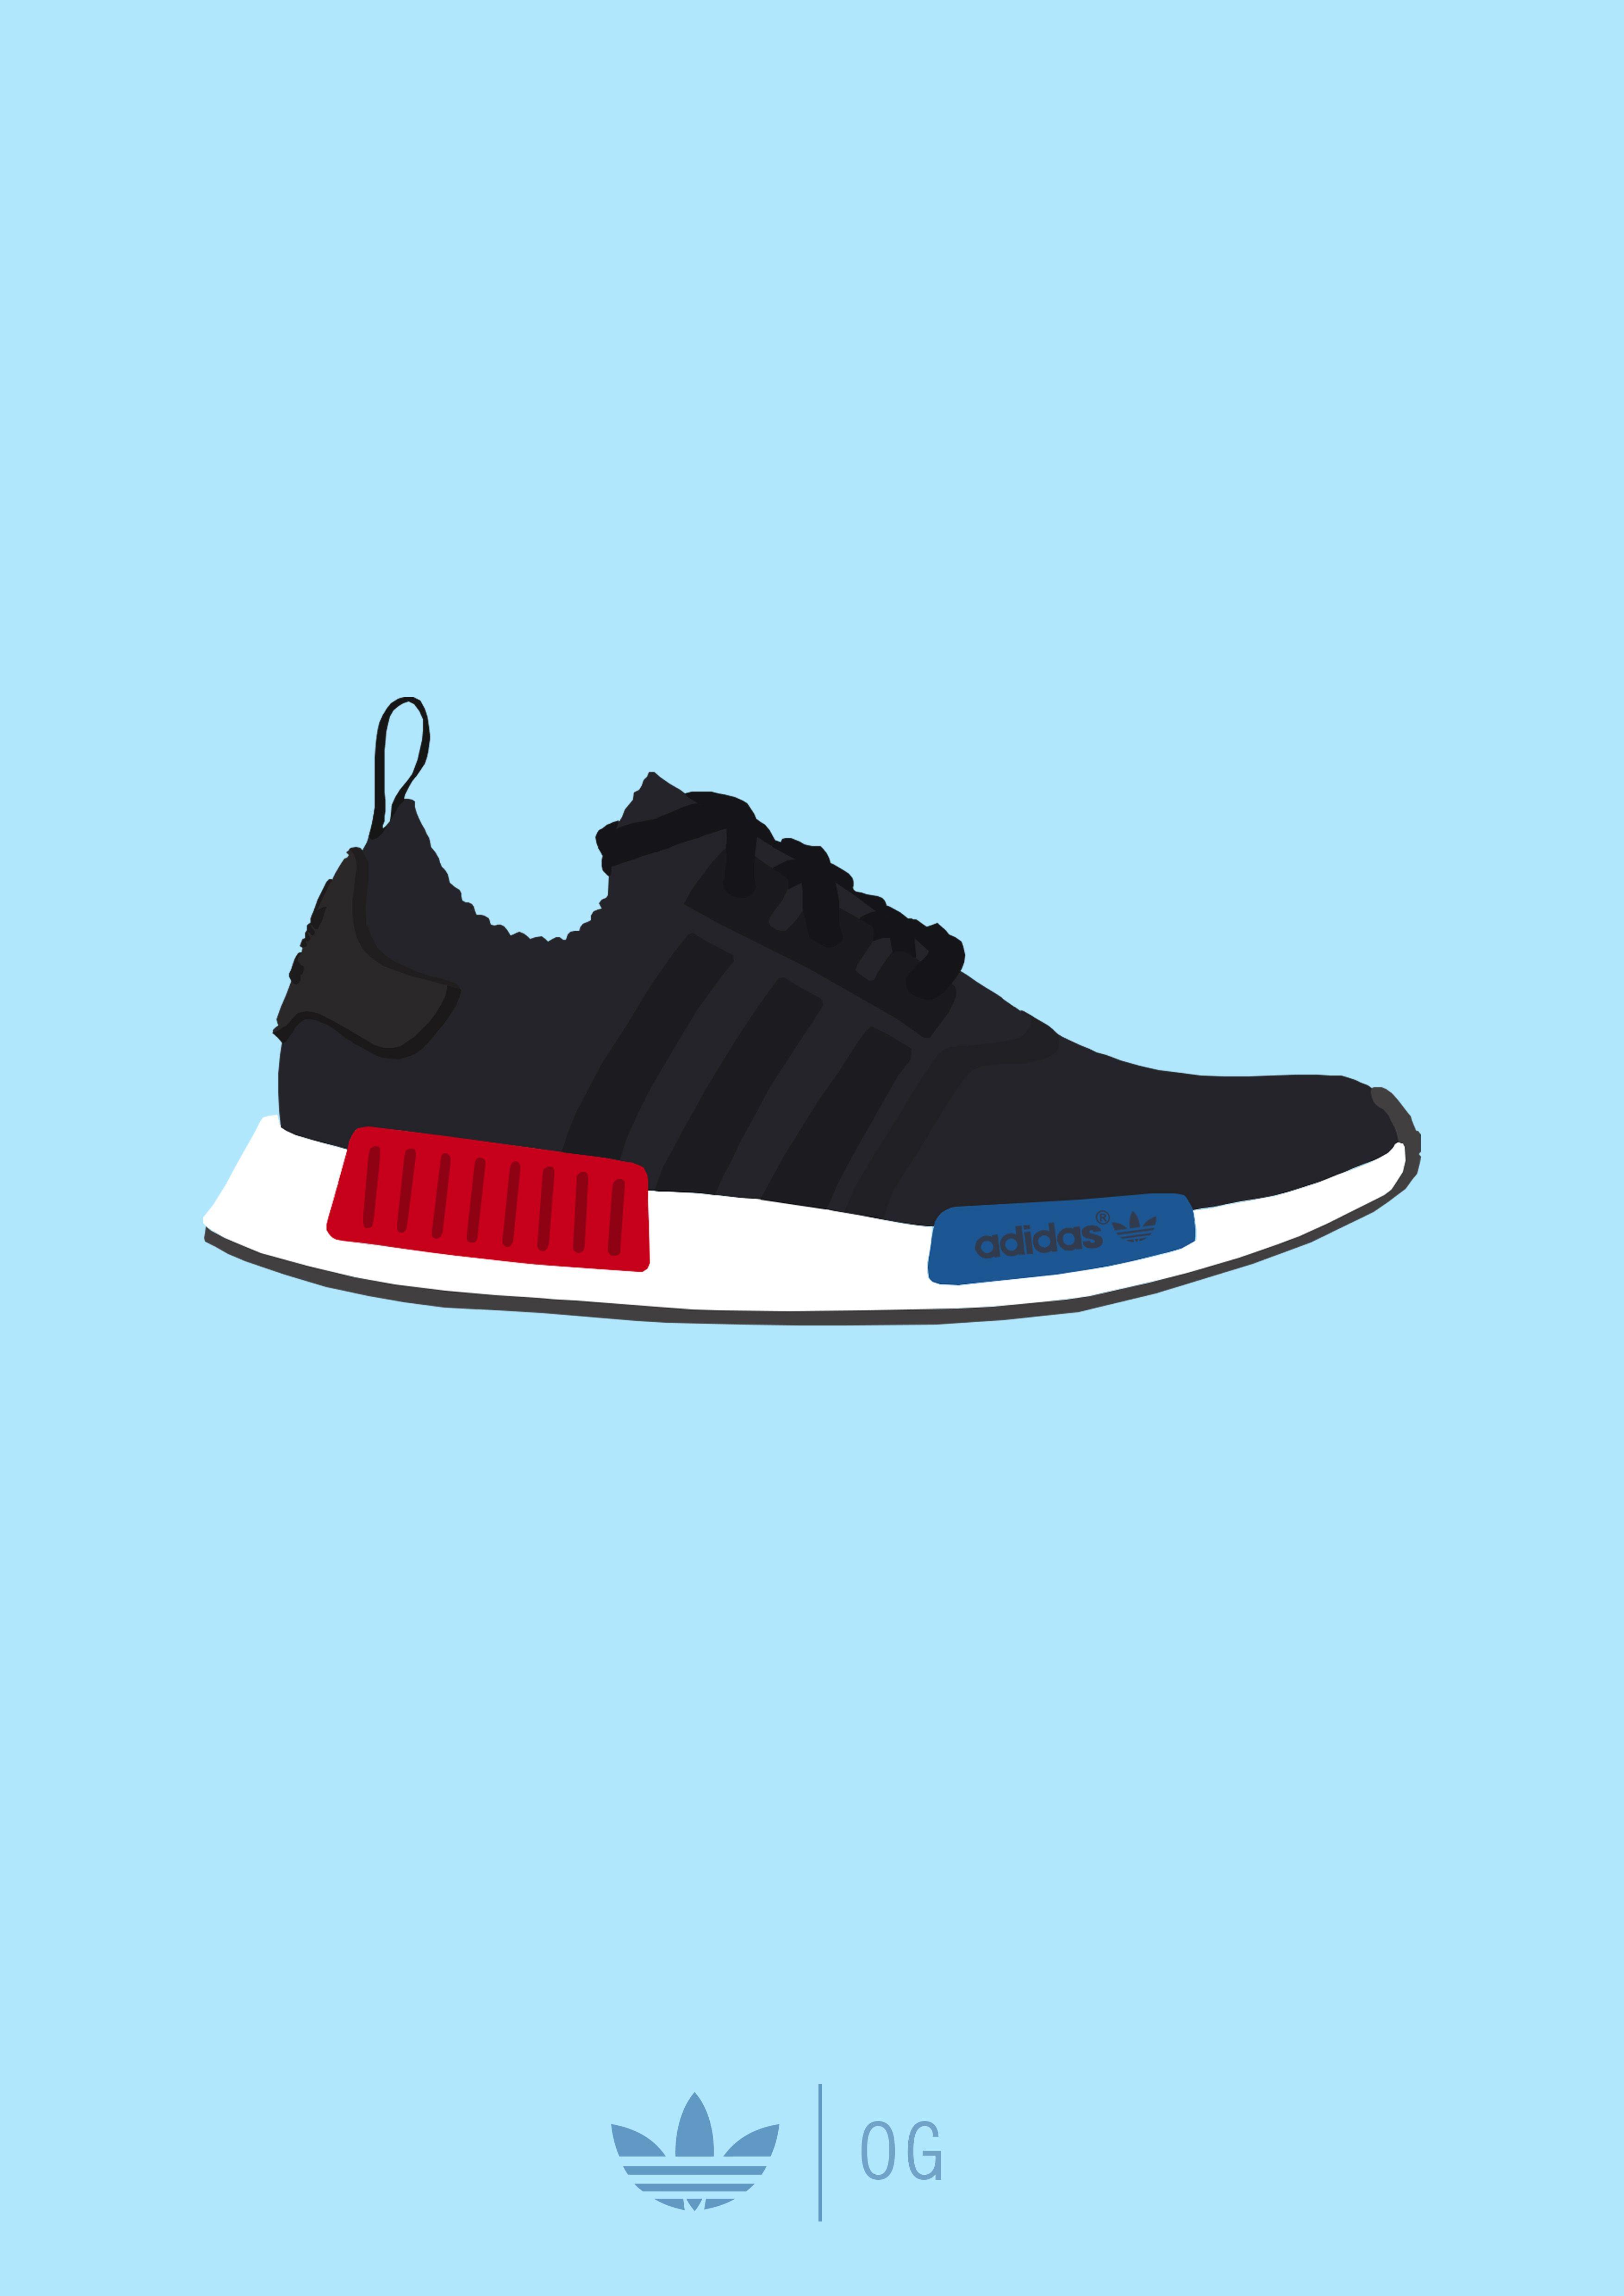 NMD Wallpapers - Top Free NMD 